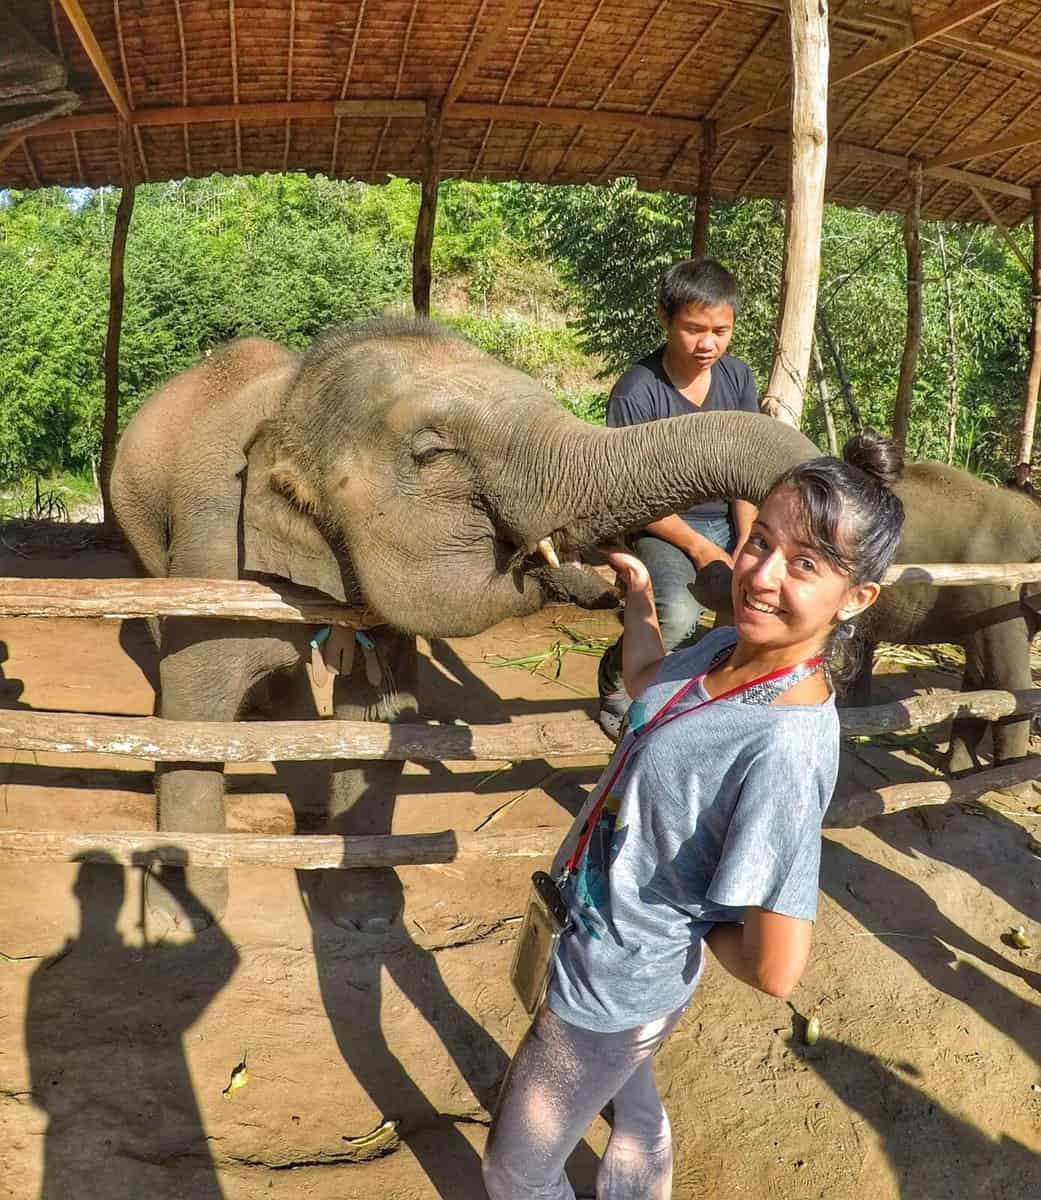 feeding elephants in Chiang Mai, Thailand - Top Things to do